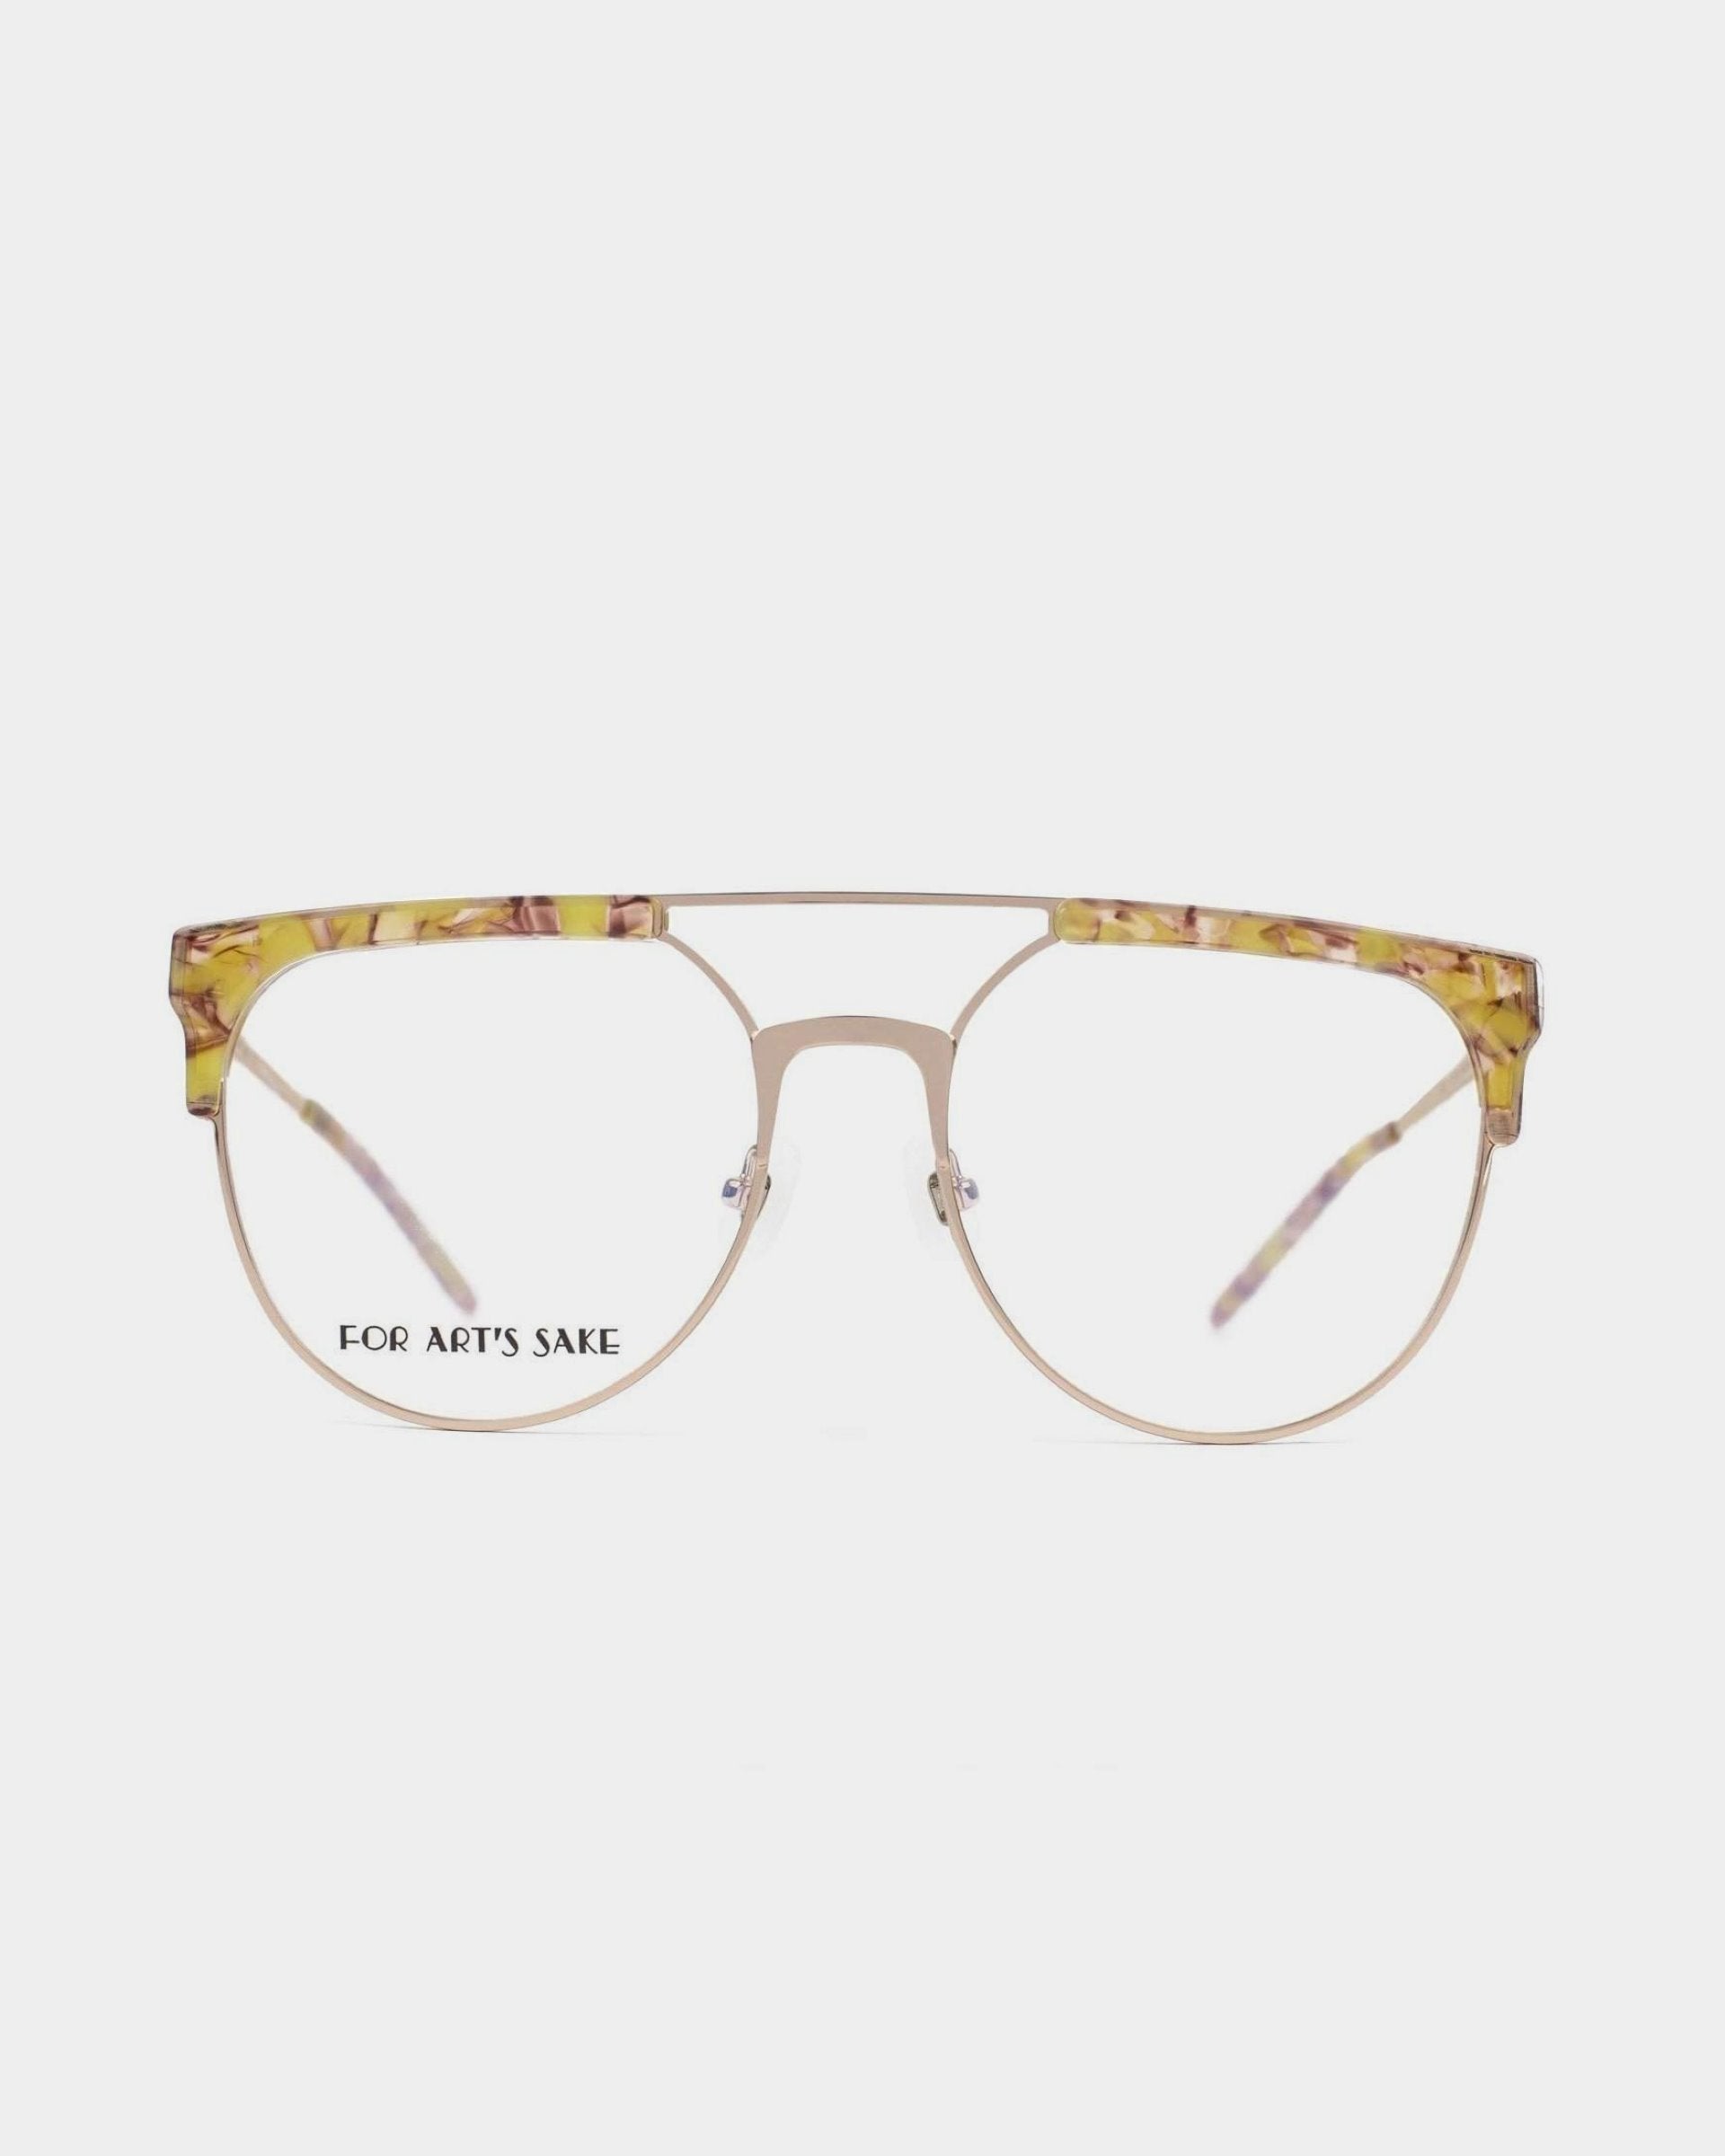 A pair of For Art&#39;s Sake® &quot;Frosty&quot; prescription glasses with a thin, gold metal frame and tortoise shell-patterned accents on the top part of the rims. The lenses are clear, with the left lens displaying &quot;FOR ART&#39;S SAKE.&quot; These chic glasses are also equipped with blue light filter technology. The background is plain white.